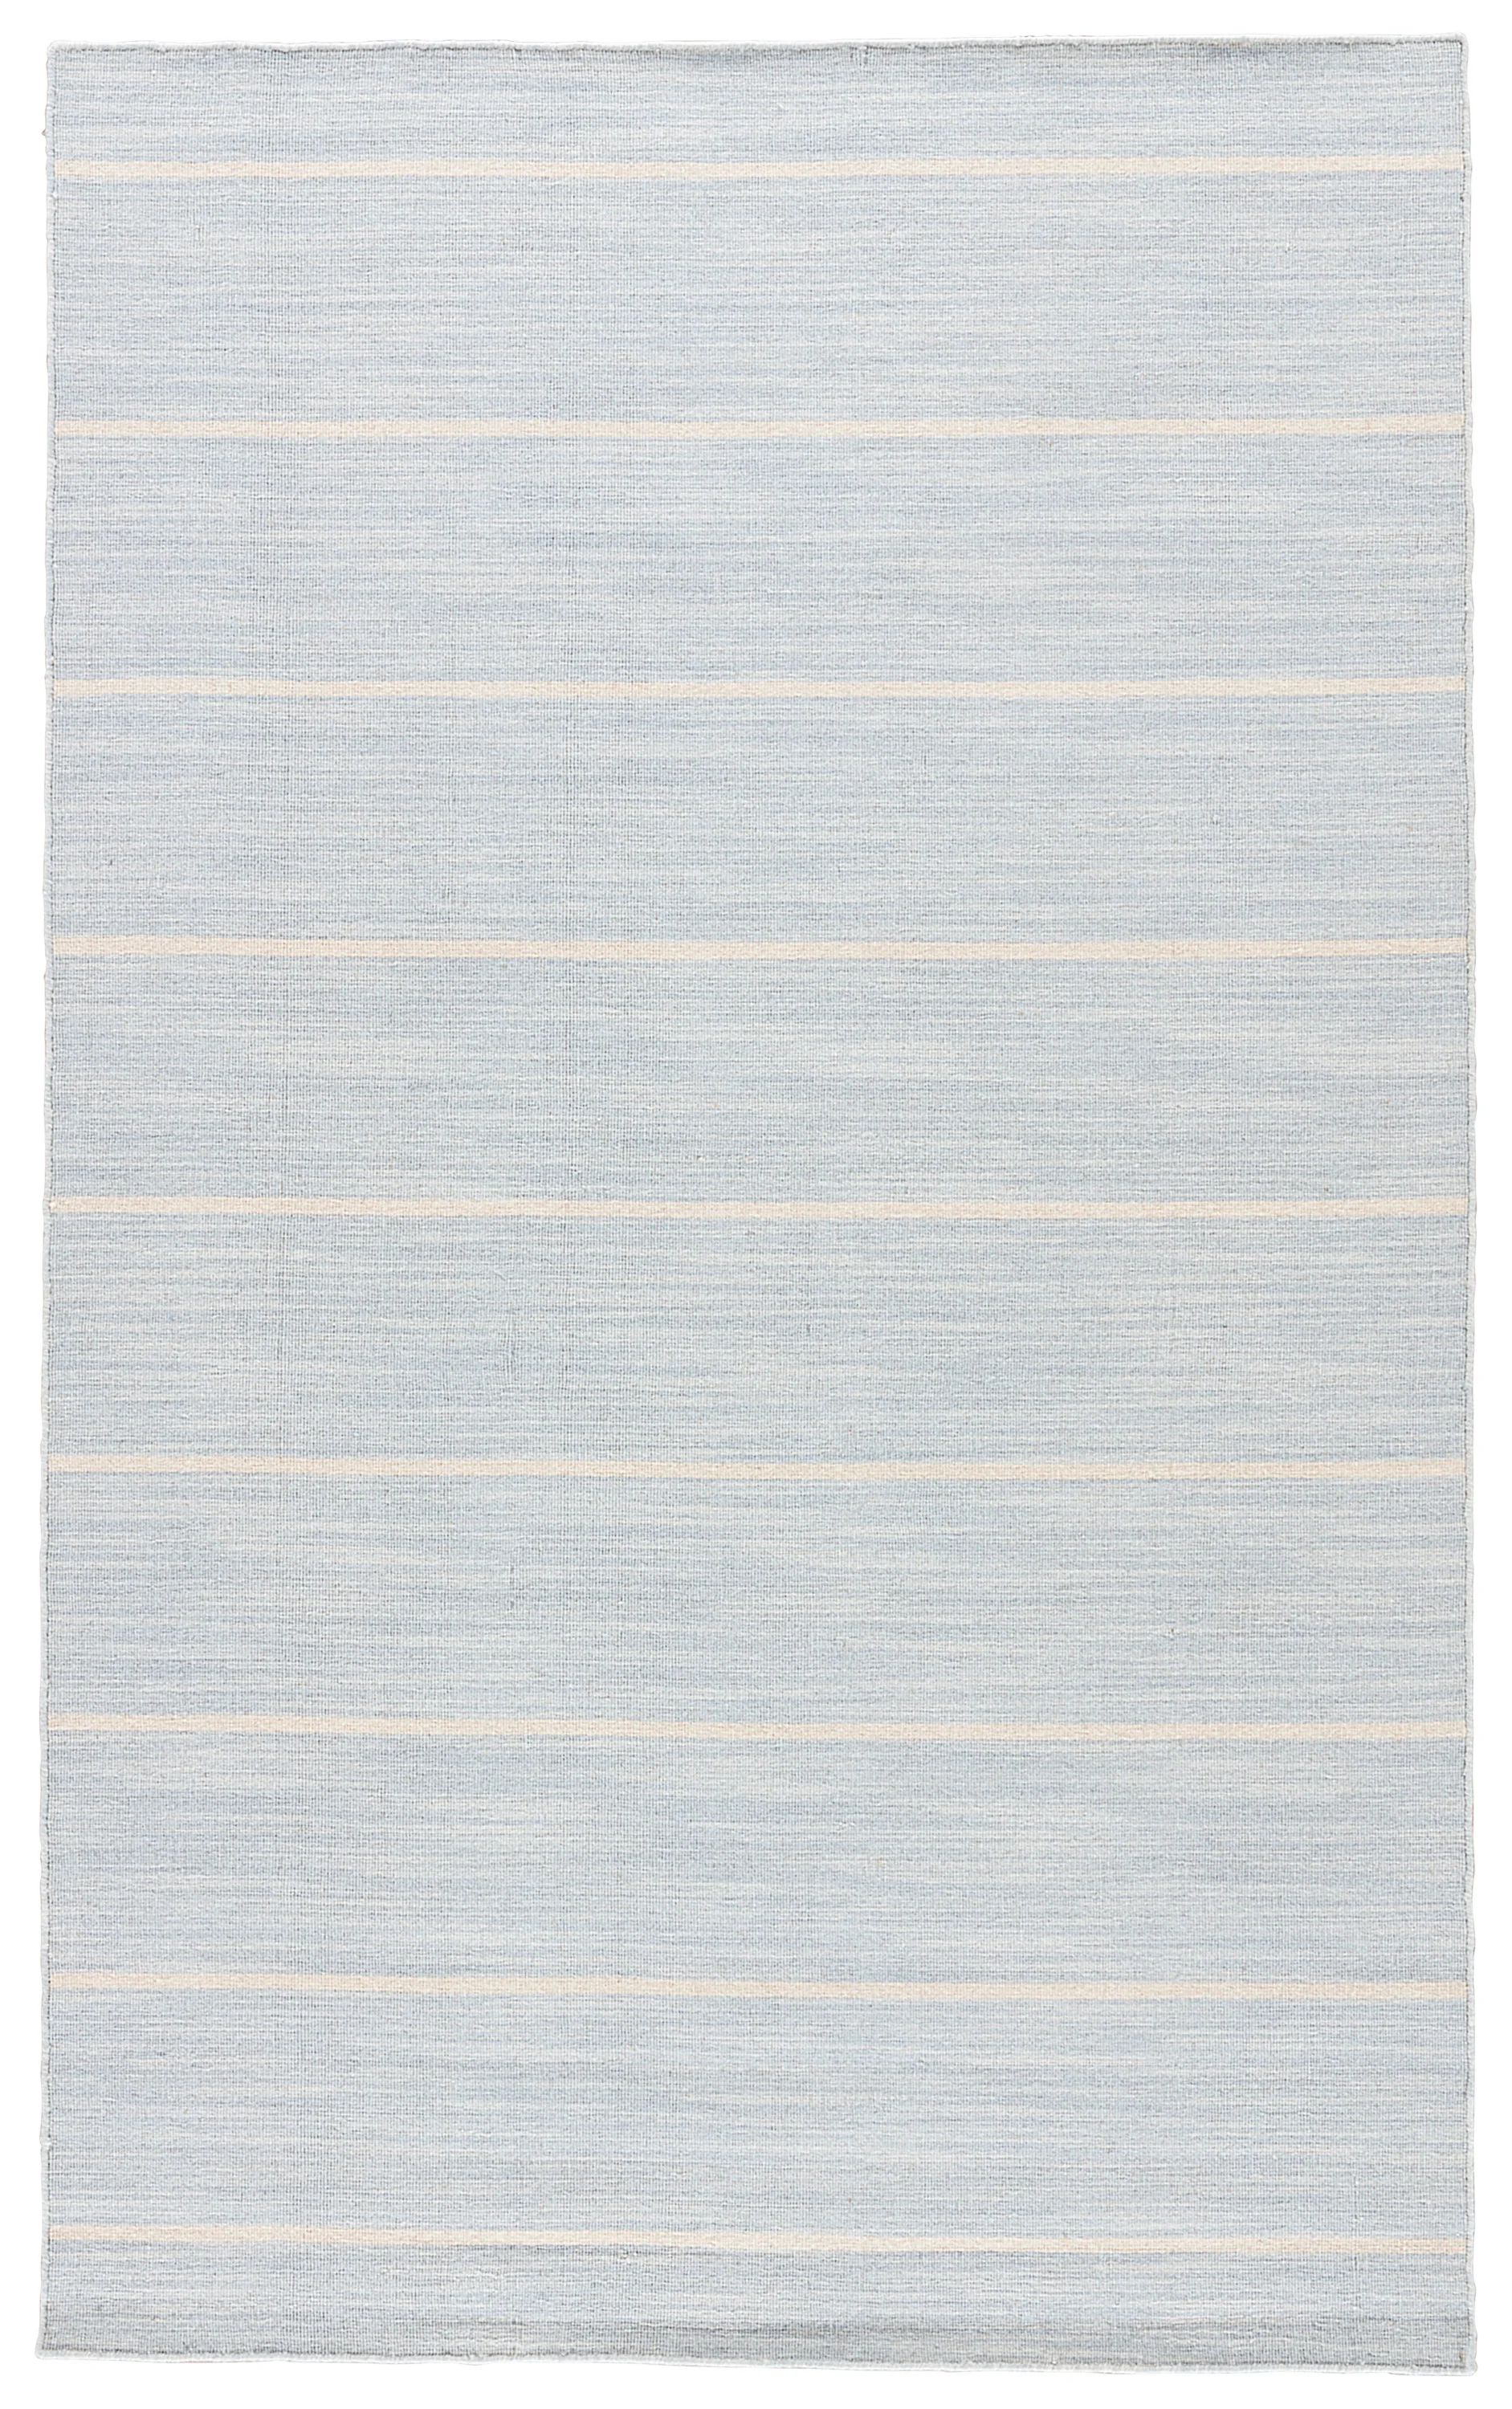 Striped Handwoven Wool Blue/White Area Rug | Wayfair Professional